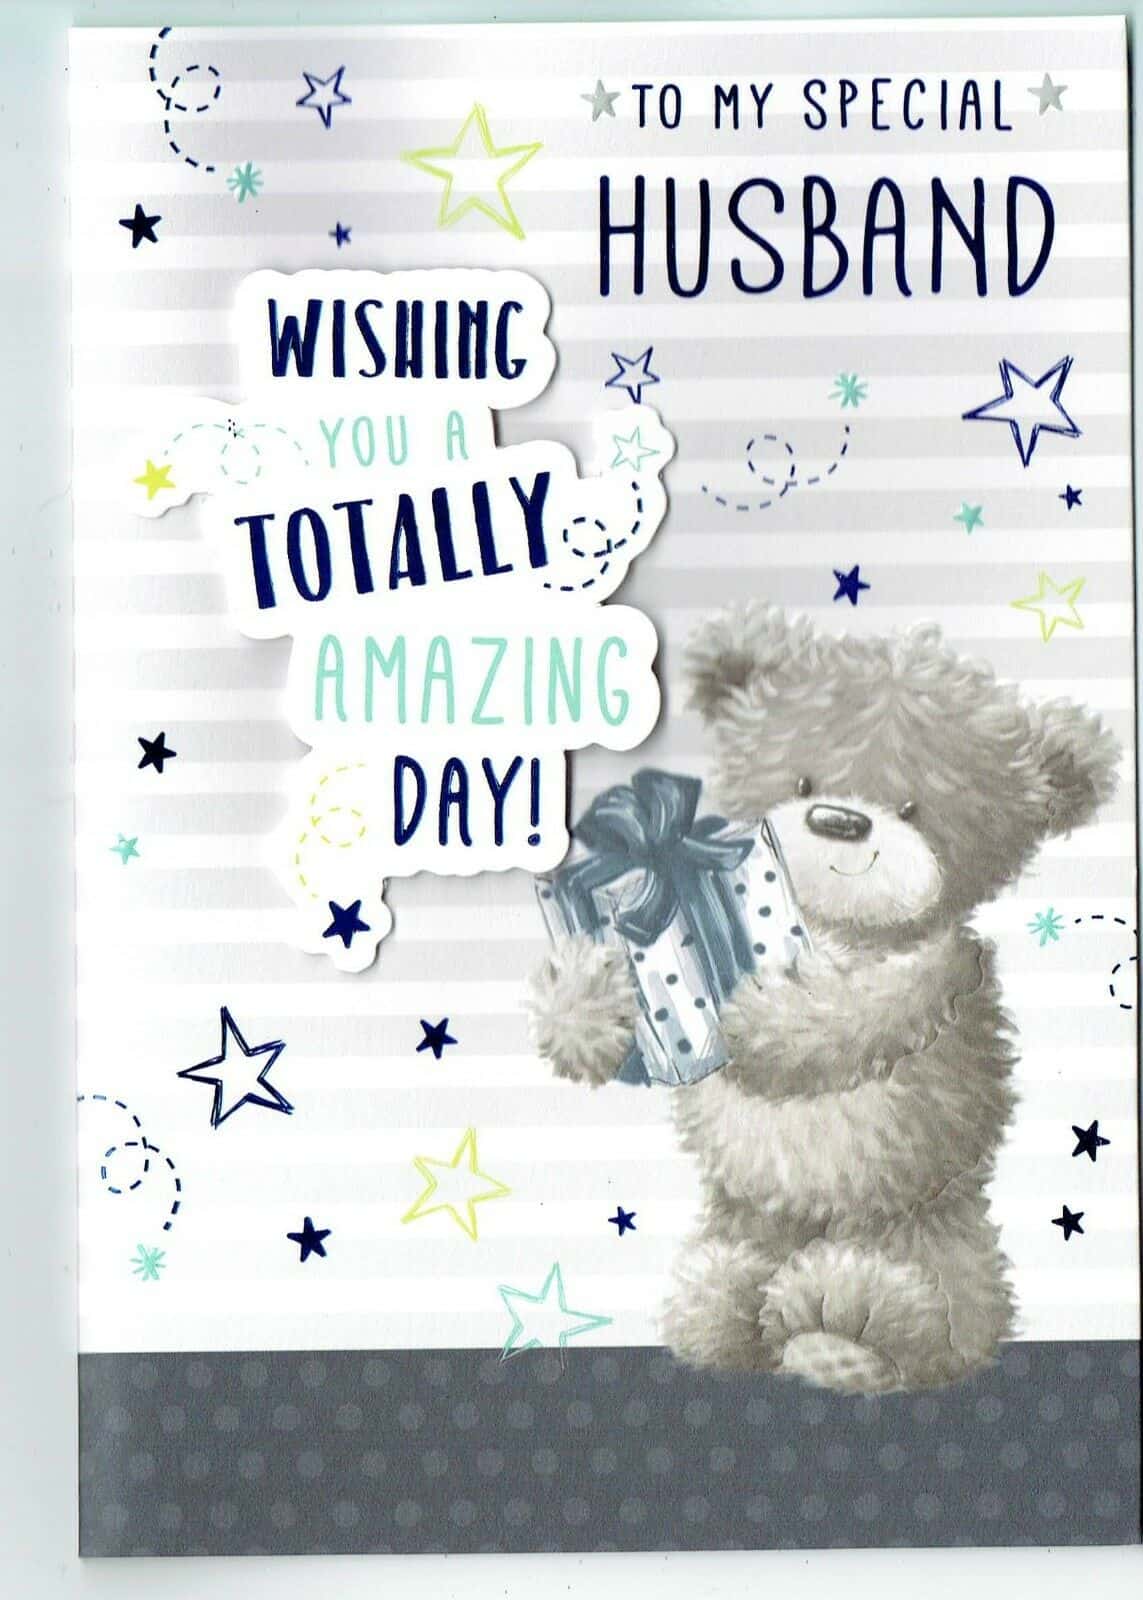 husband-birthday-card-to-my-special-husband-with-love-gifts-cards